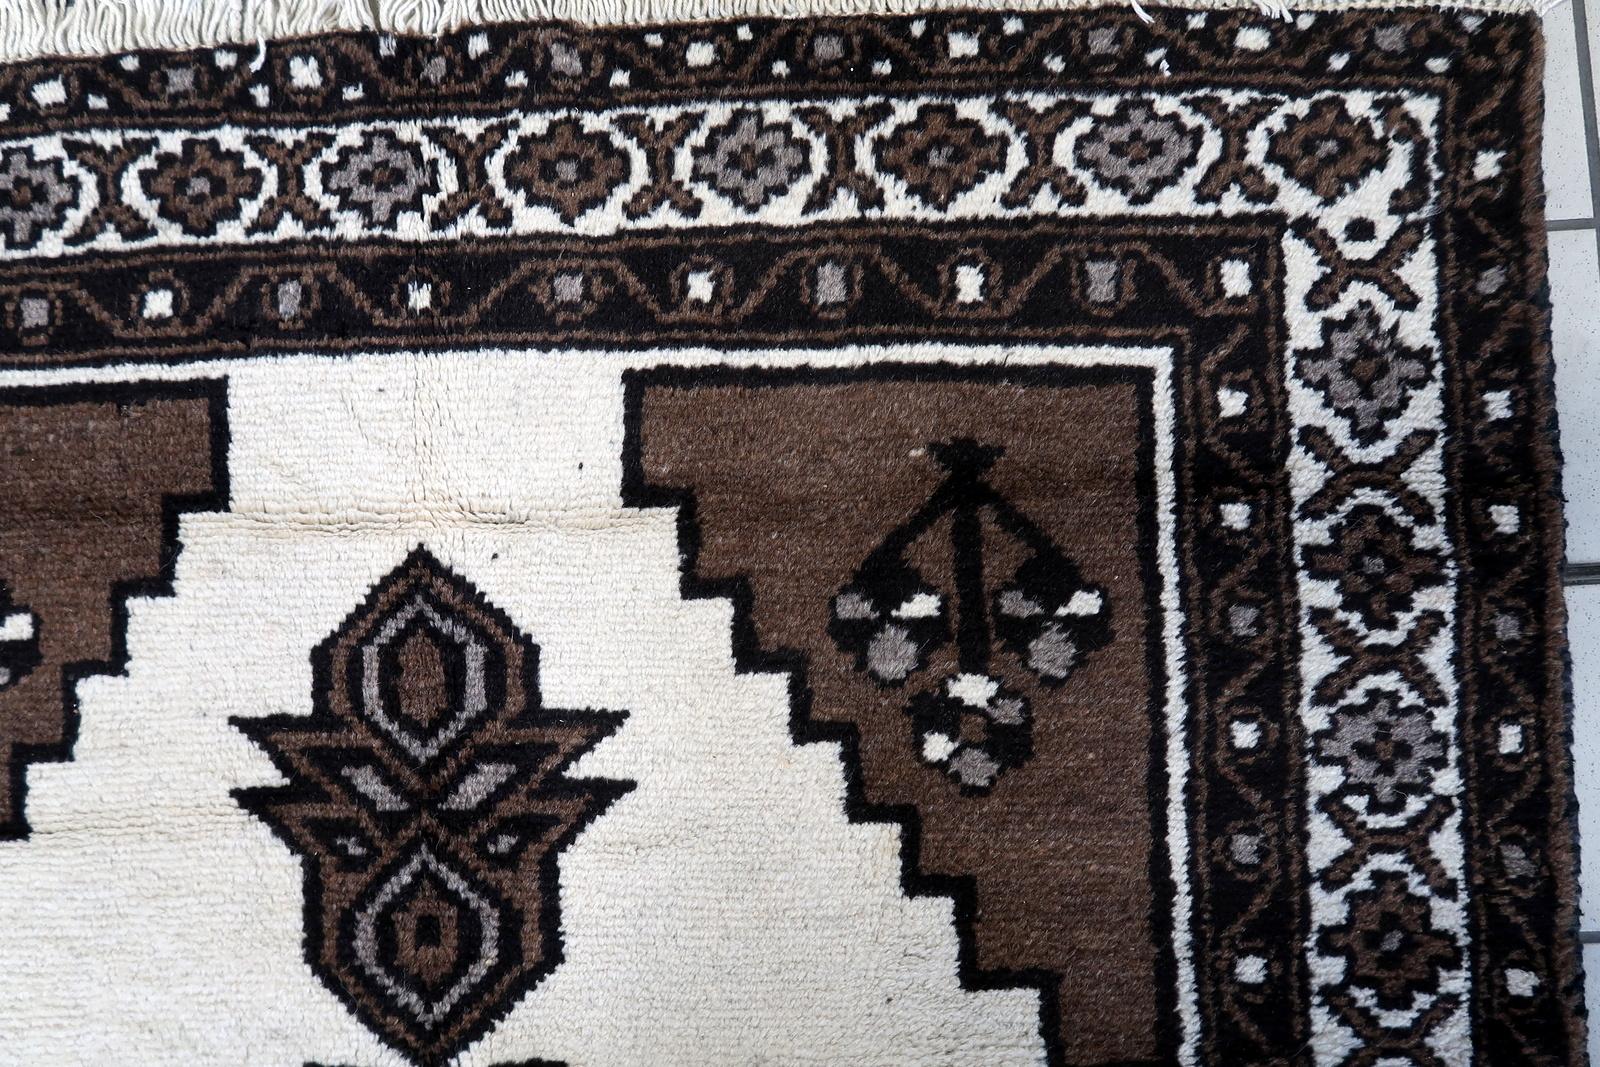 Handmade Vintage Persian Style Gabbeh Rug 4.1' x 6.9', 1970s - 1C1132 In Good Condition For Sale In Bordeaux, FR